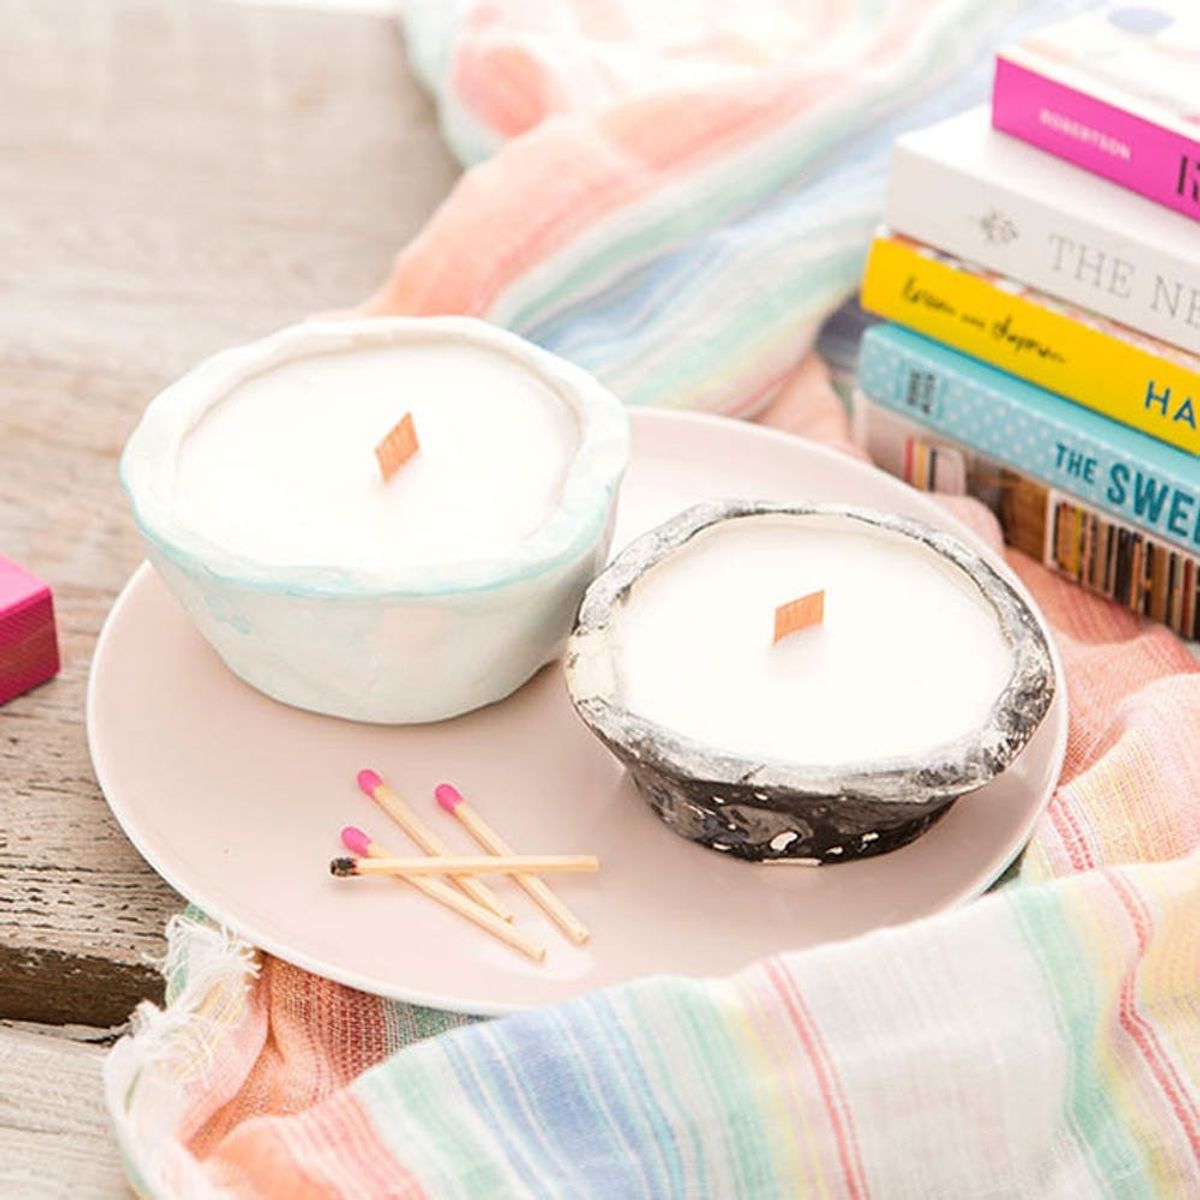 Make These Super Simple DIY Candles for Your Squad